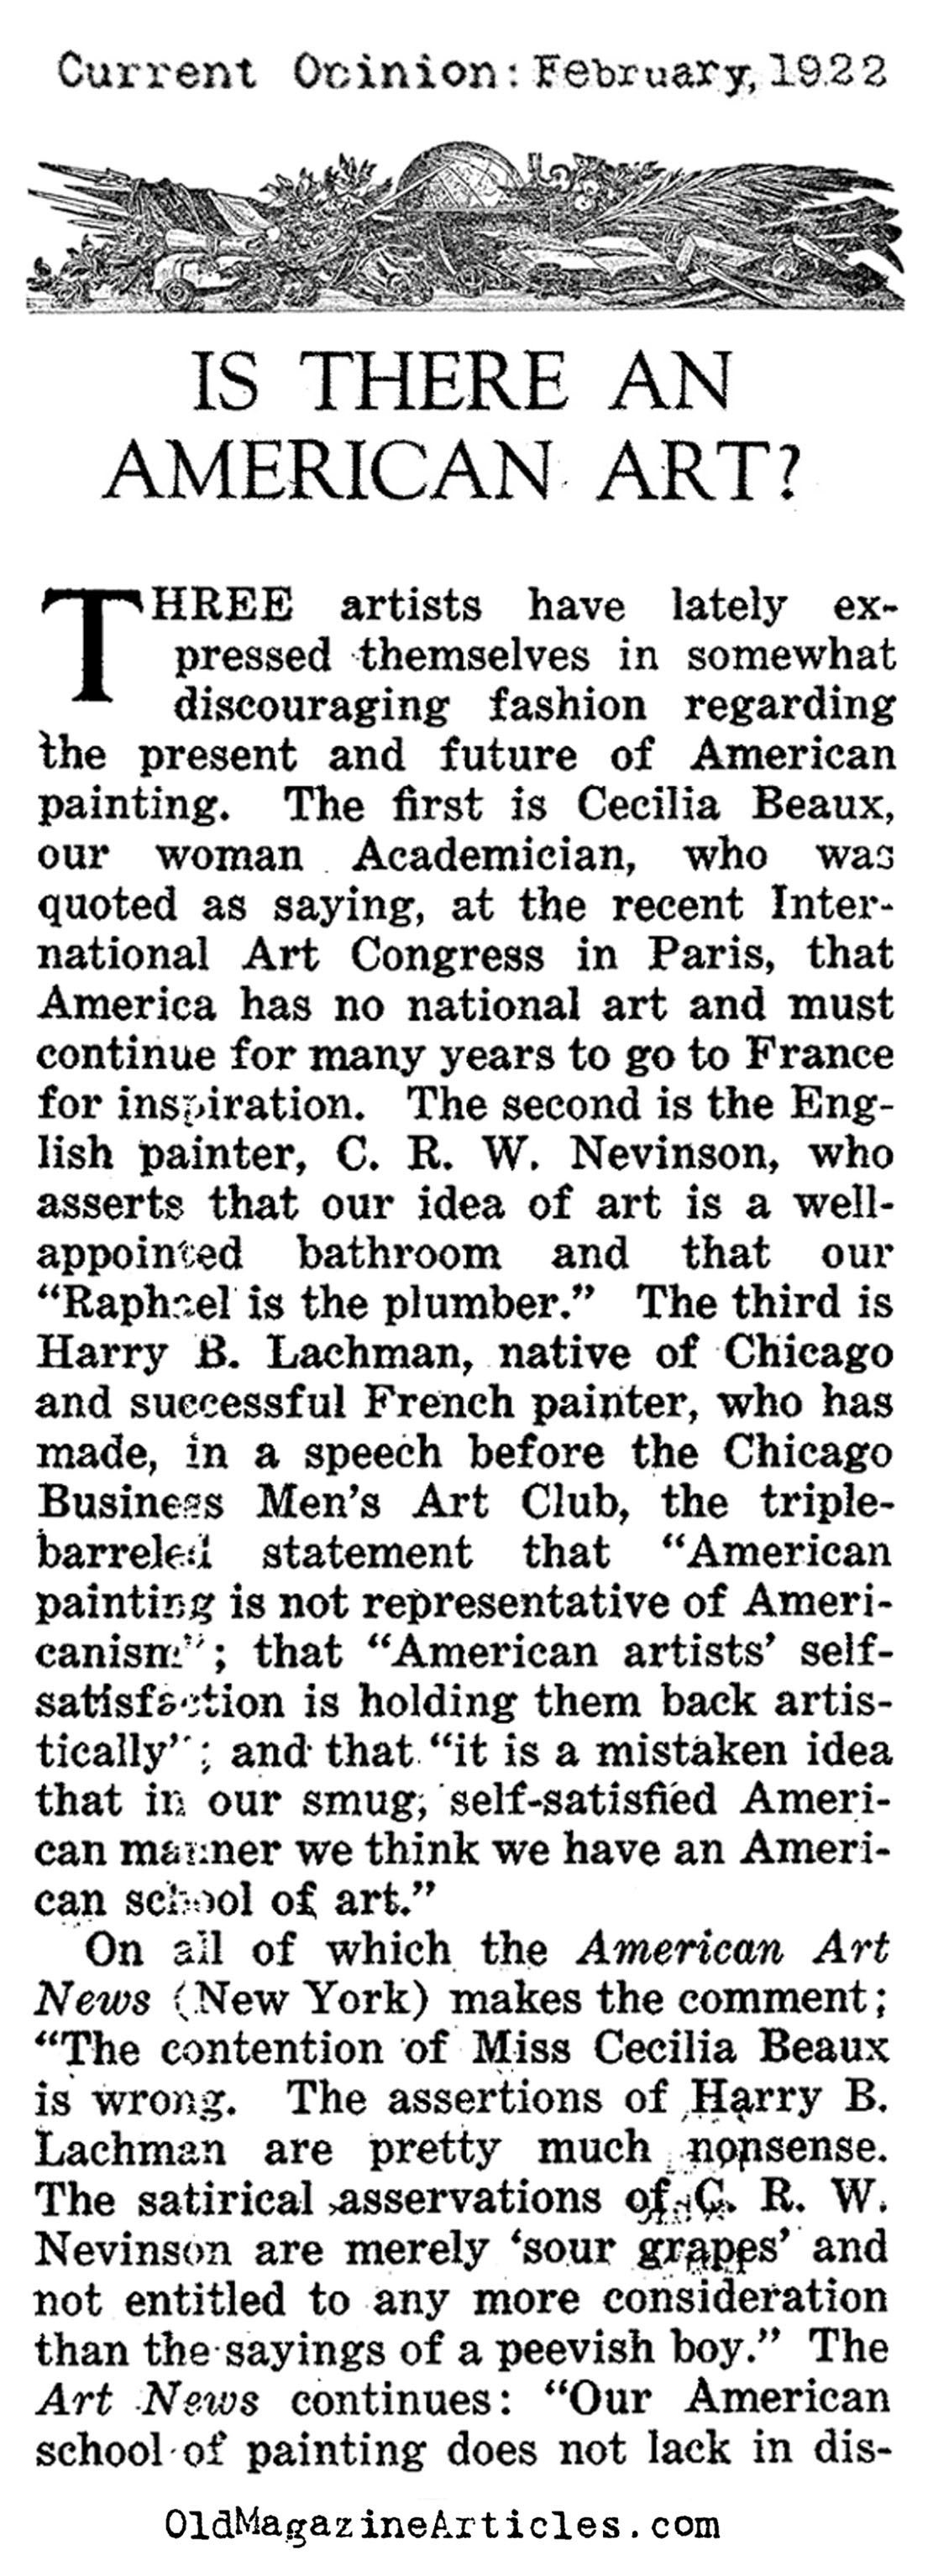 Is There an American Art? (Current Opinion, 1922)